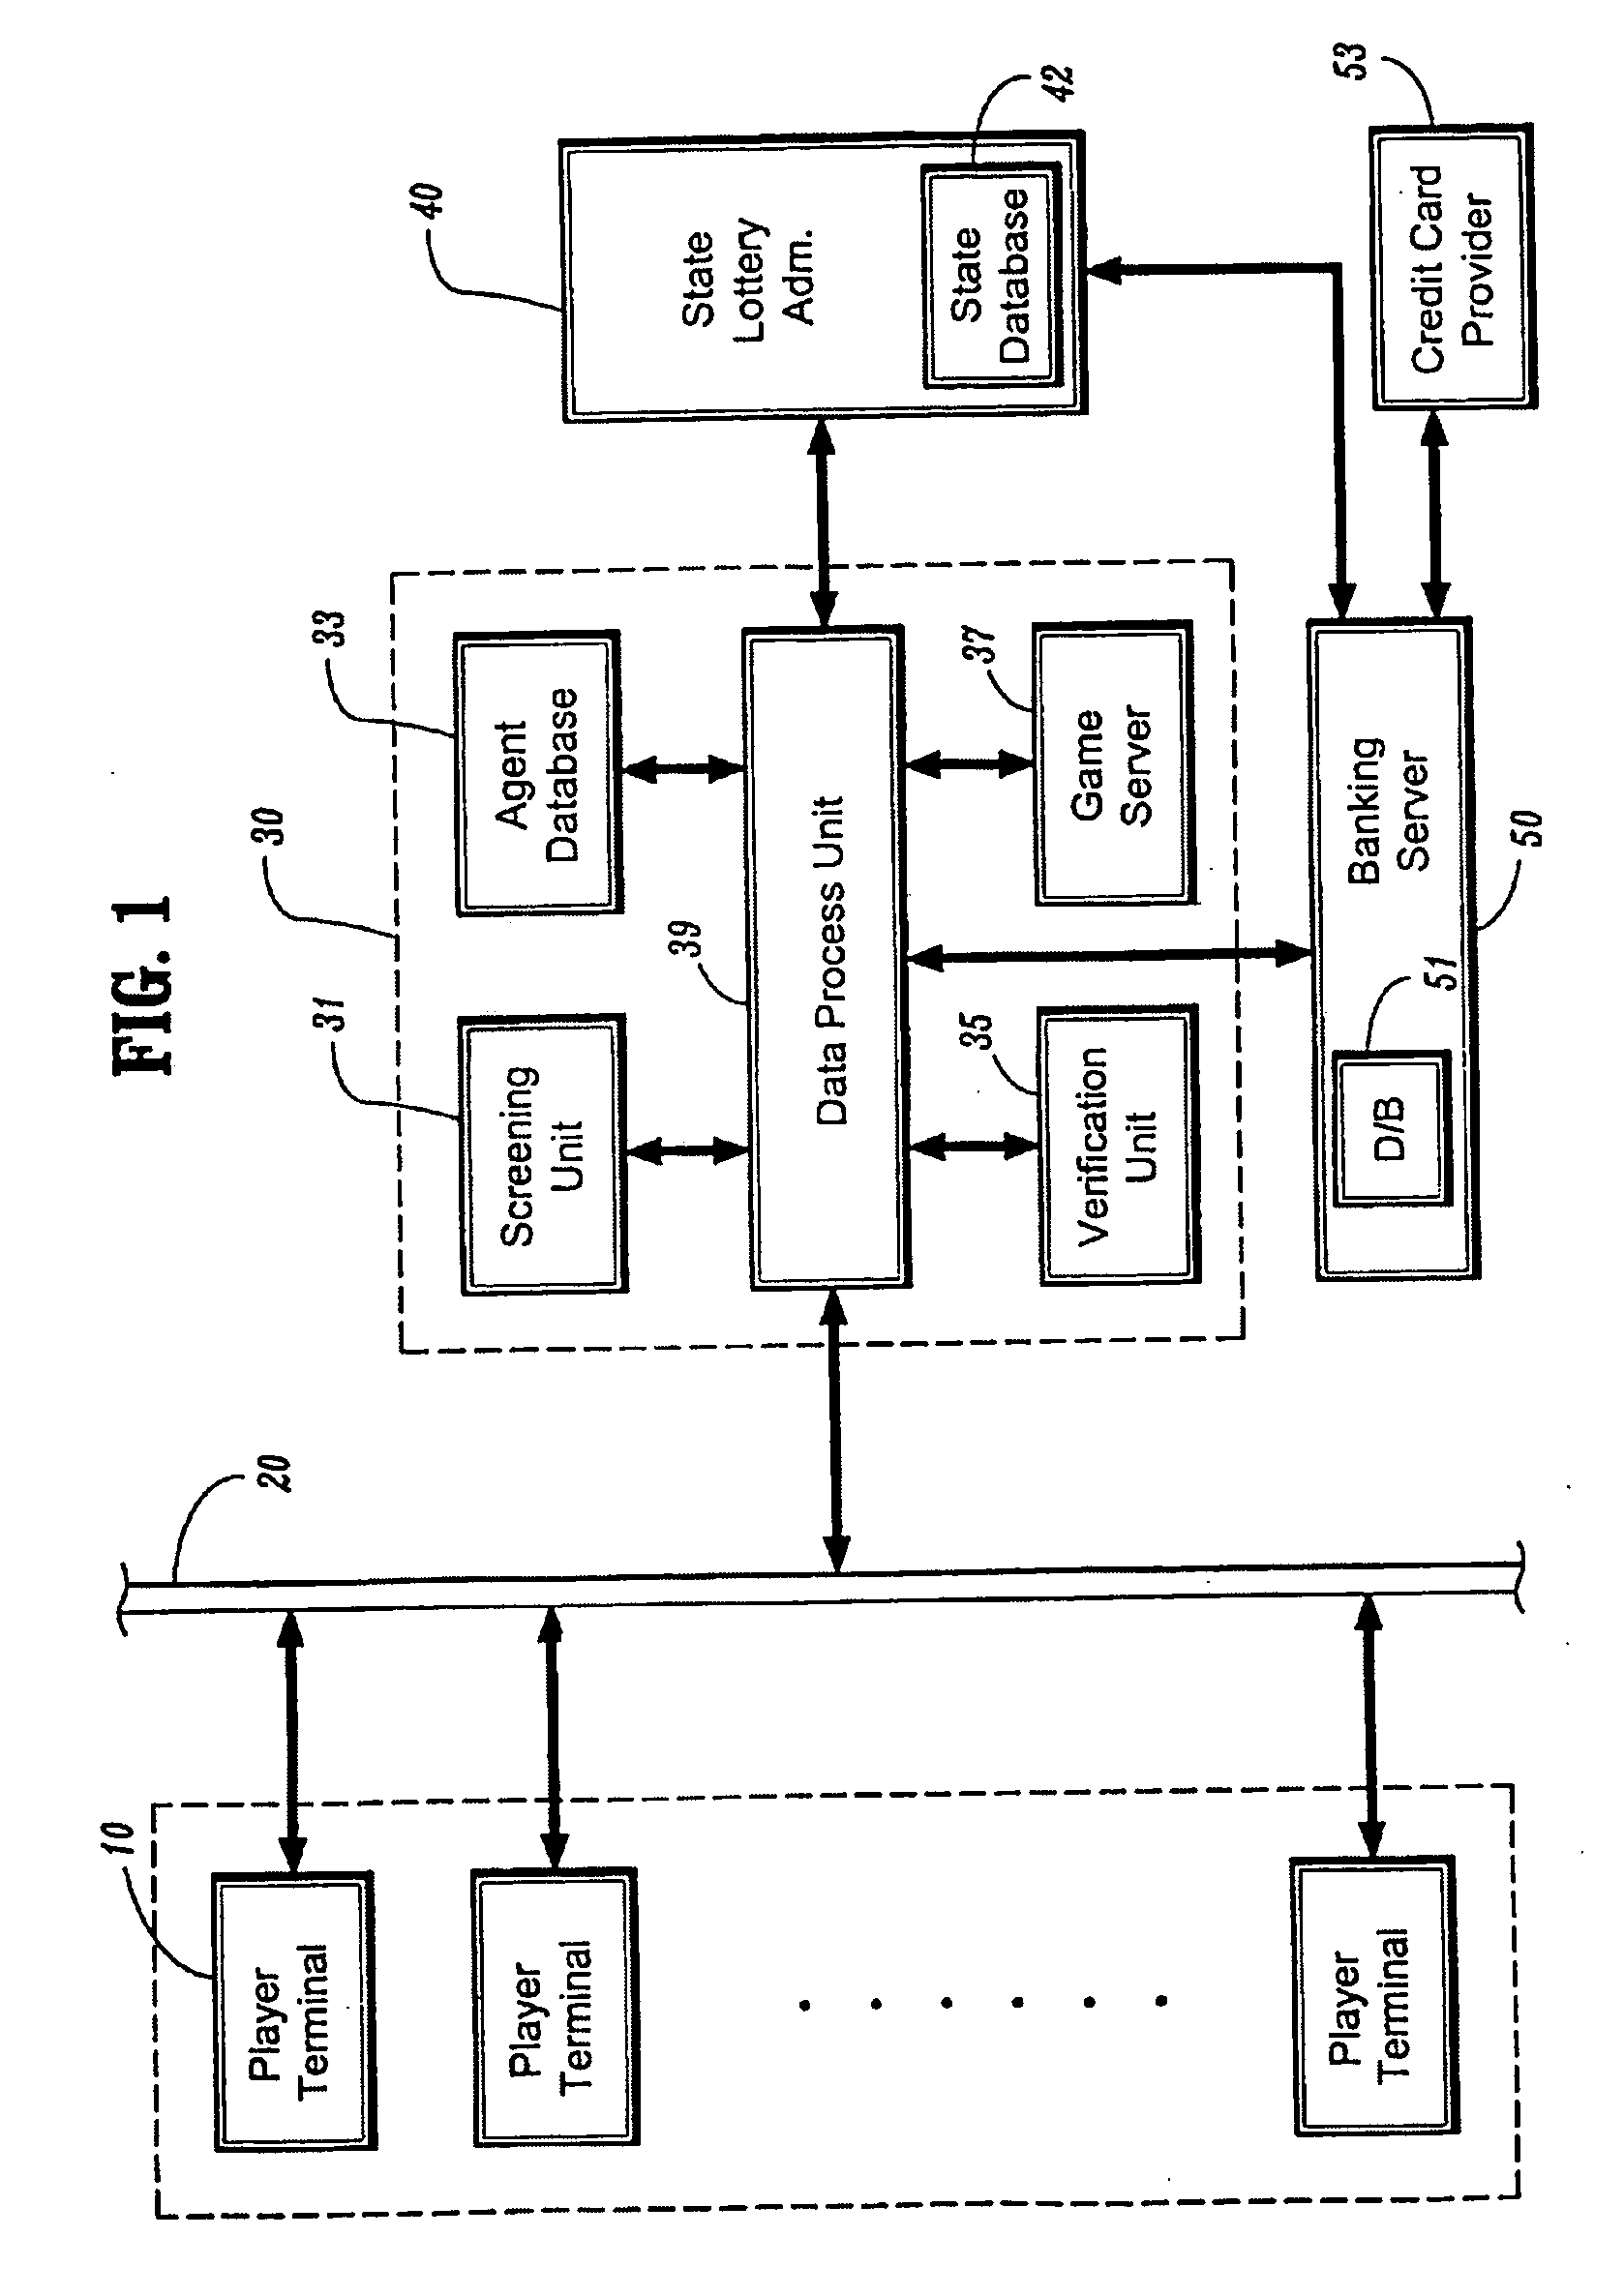 System and method for operating on-line governmental lottery games